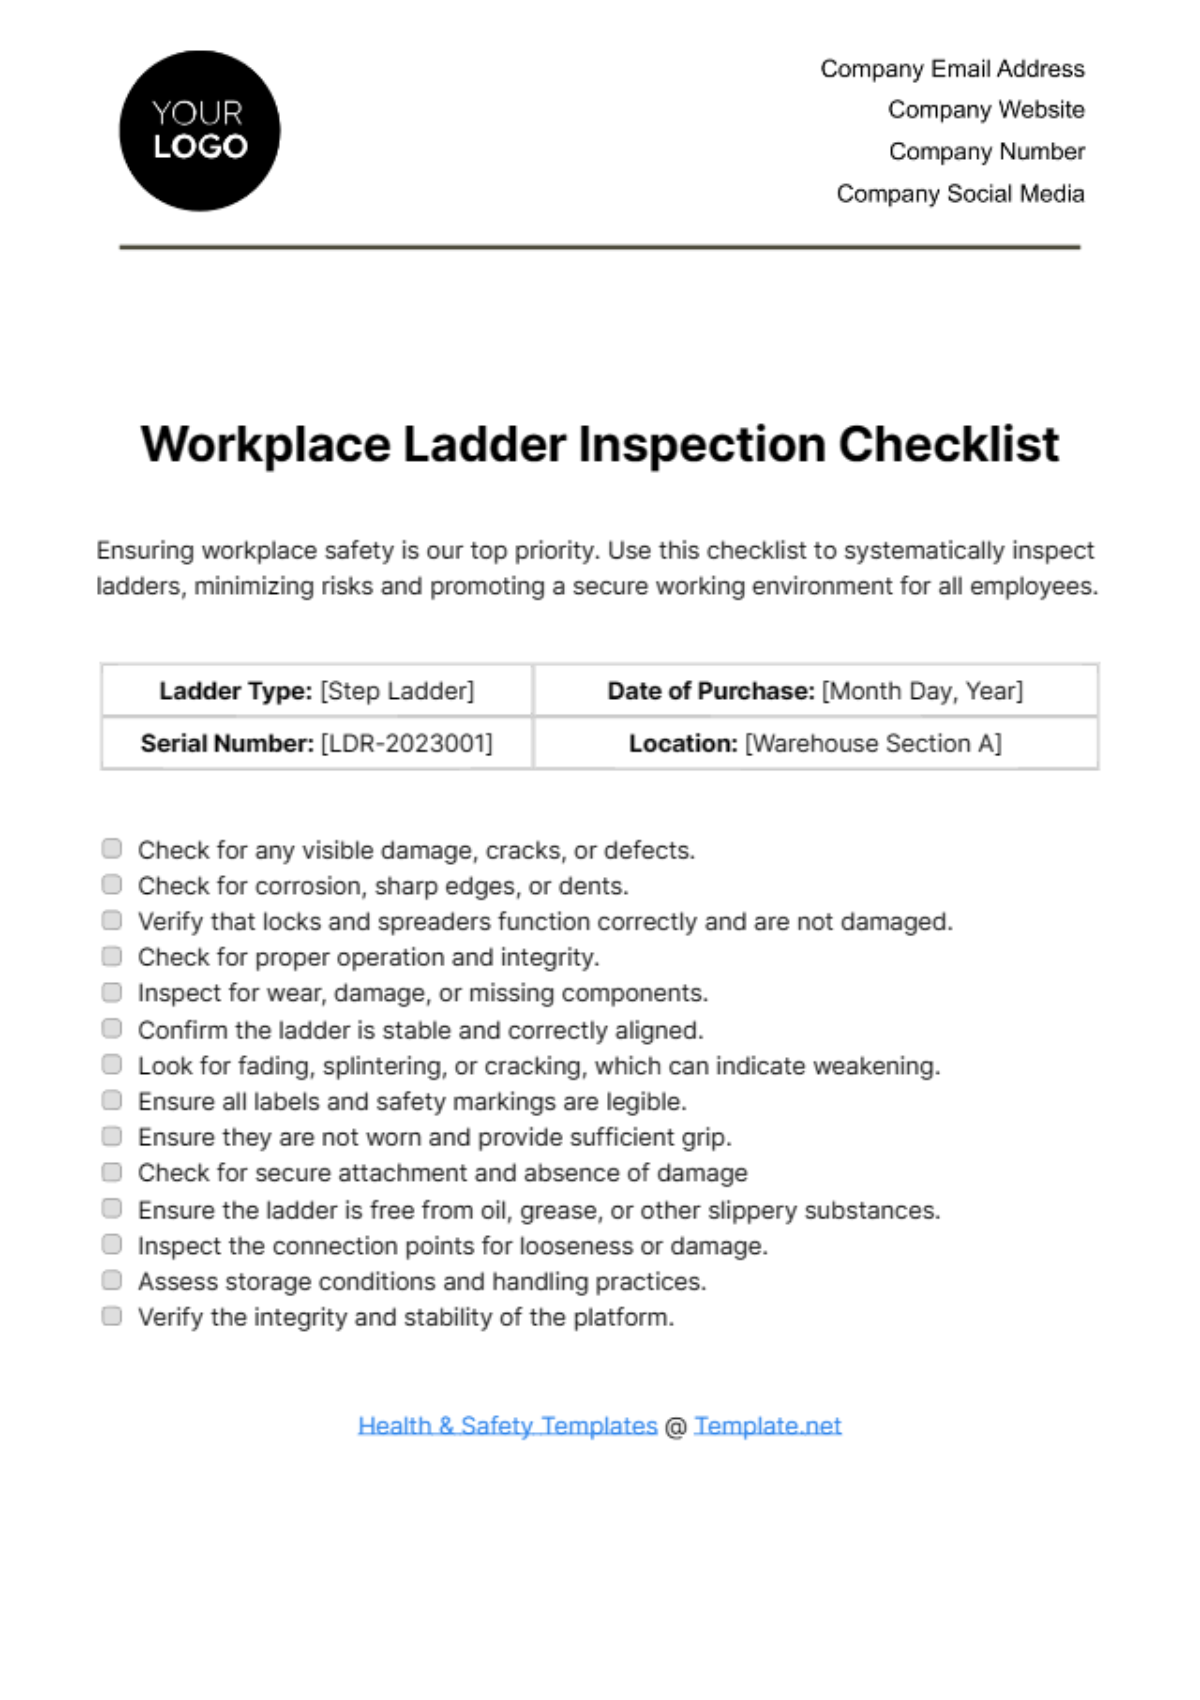 Free Workplace Ladder Inspection Checklist Template